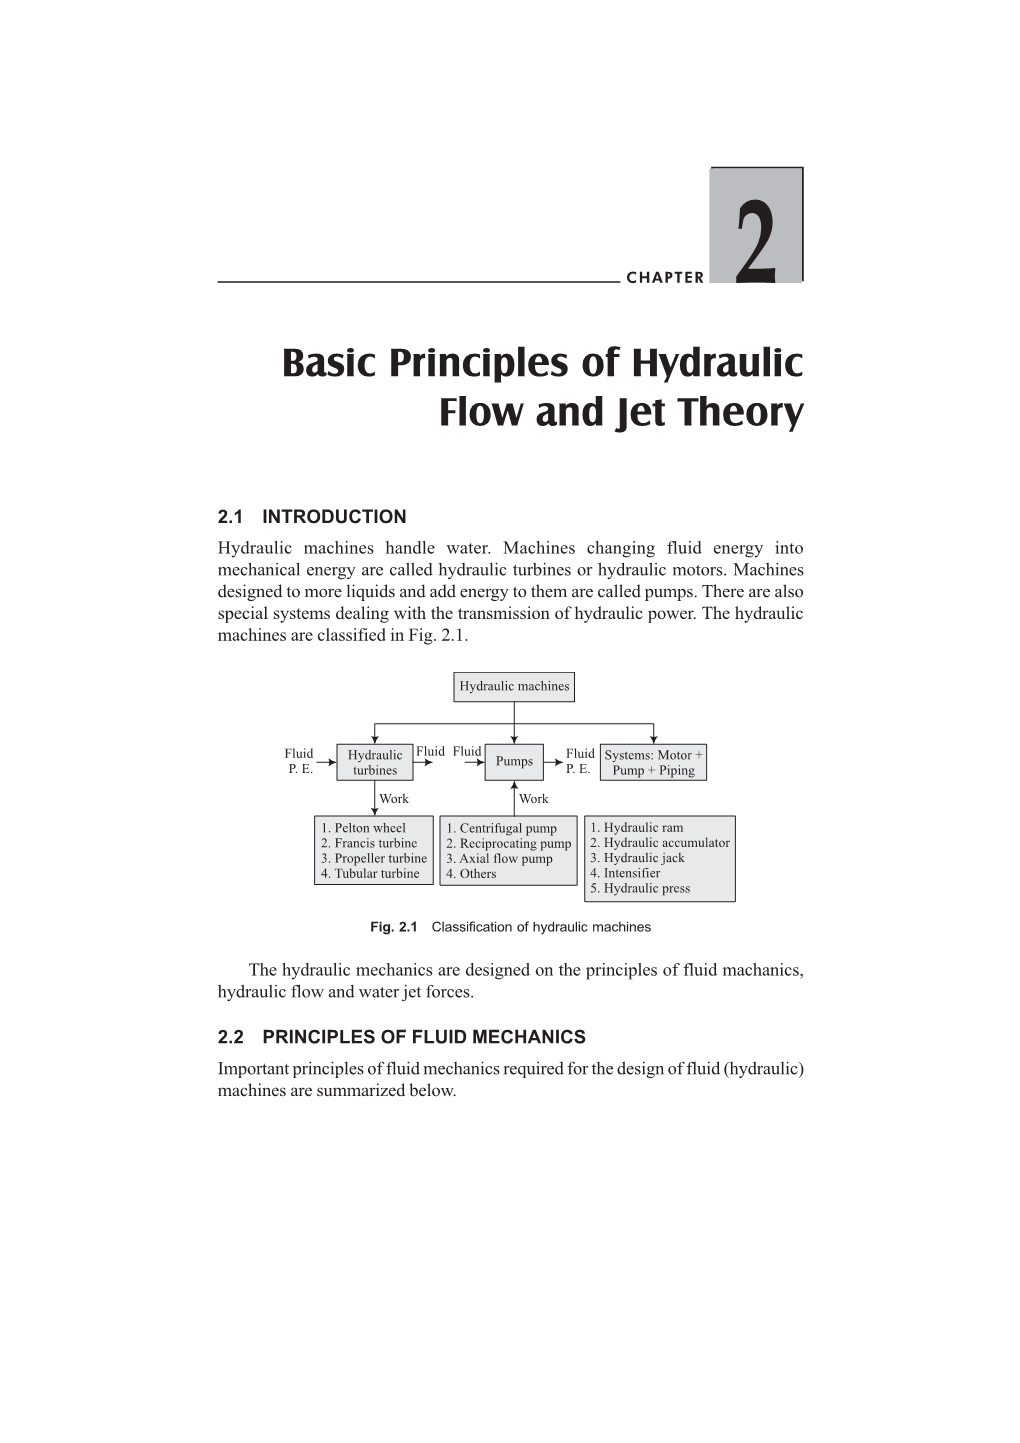 Basic Principles of Hydraulic Flow and Jet Theory